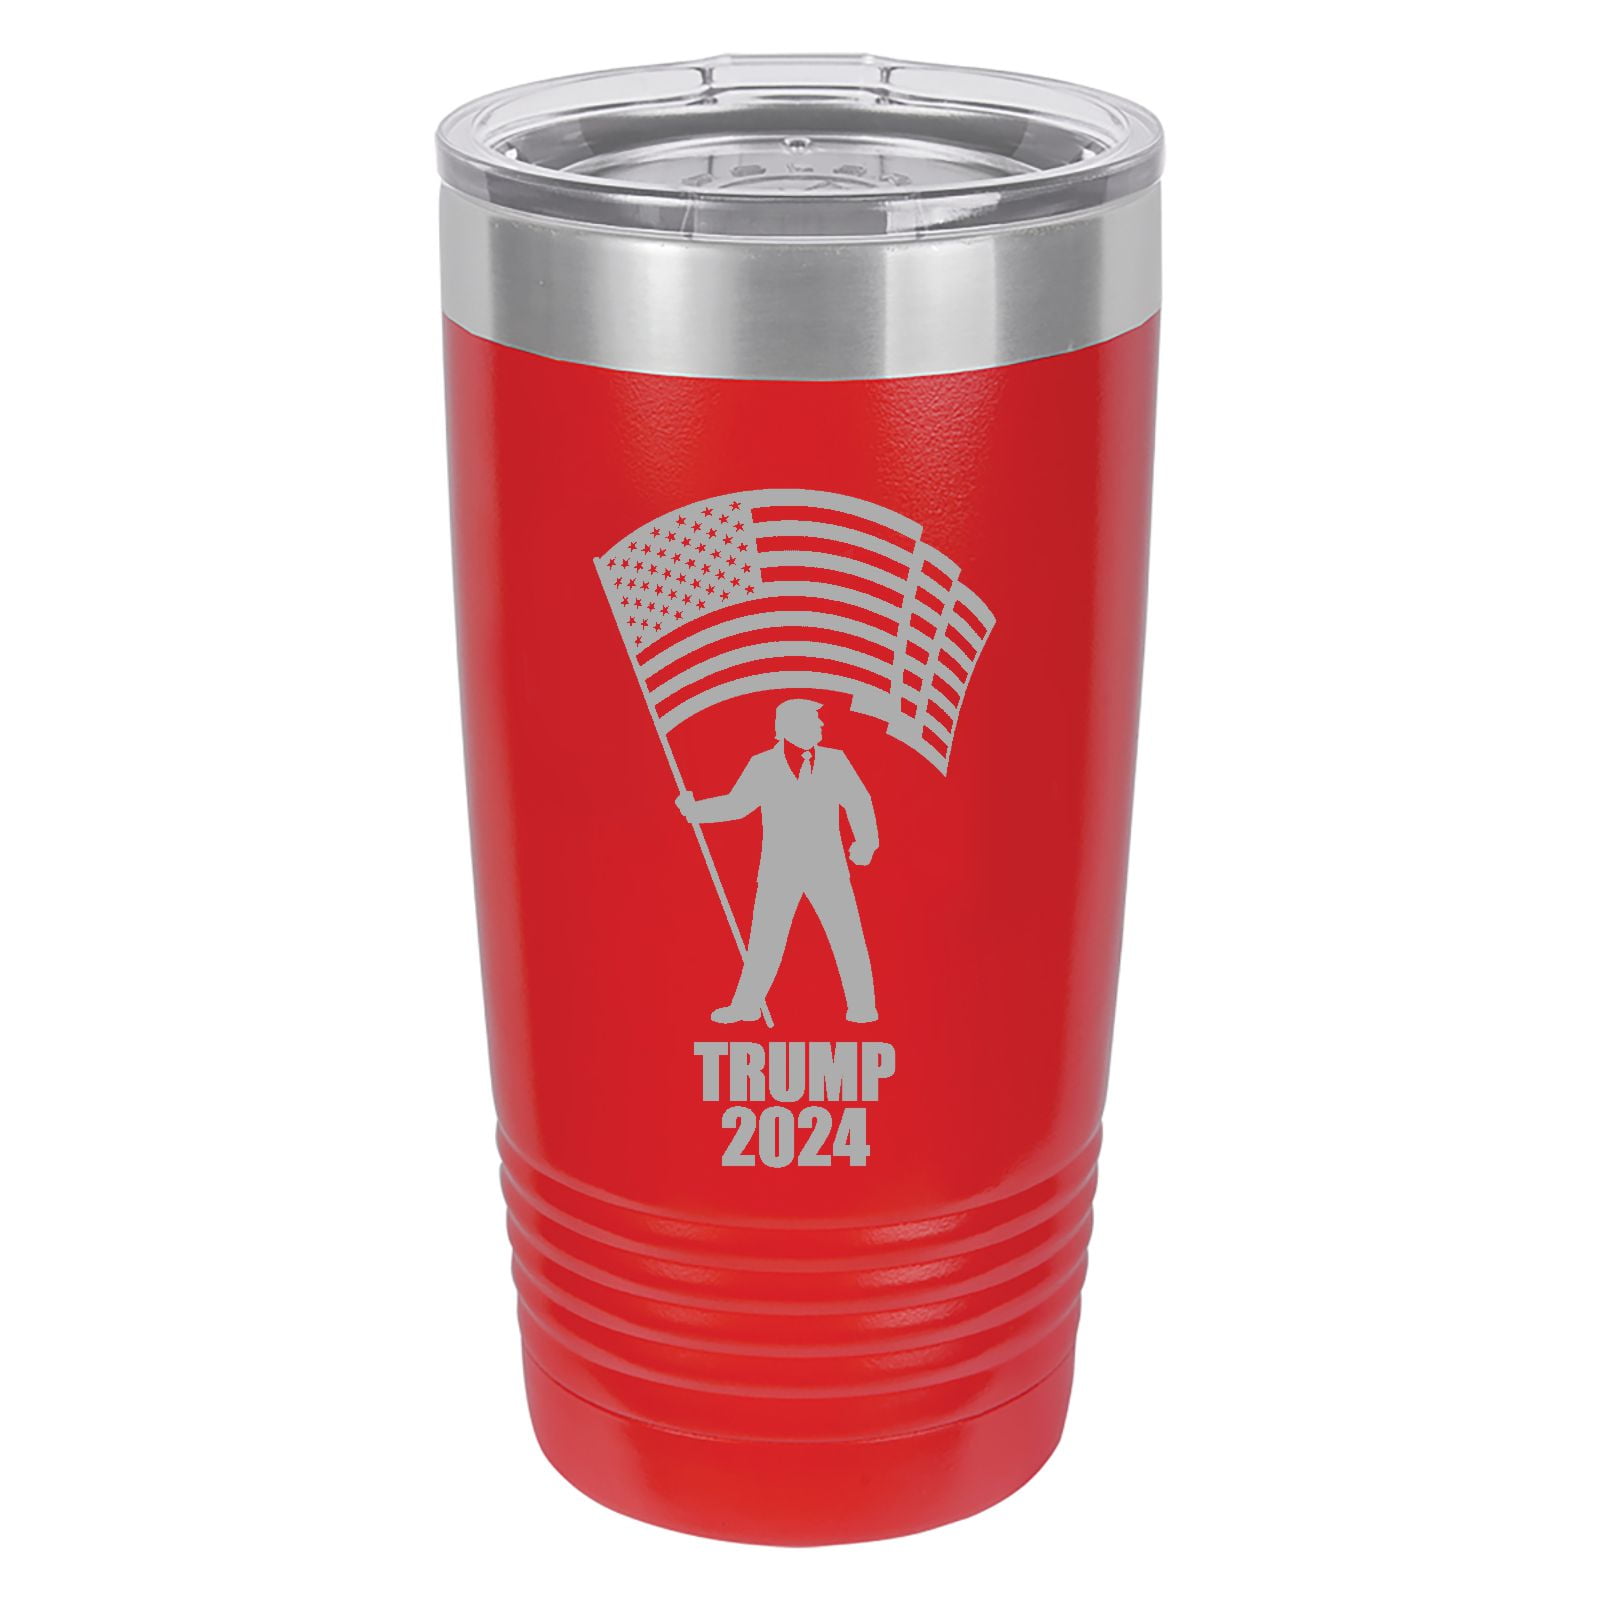 Trump 2024 Stainless Steel Insulated Tumbler with Lid 20 Oz. (Red